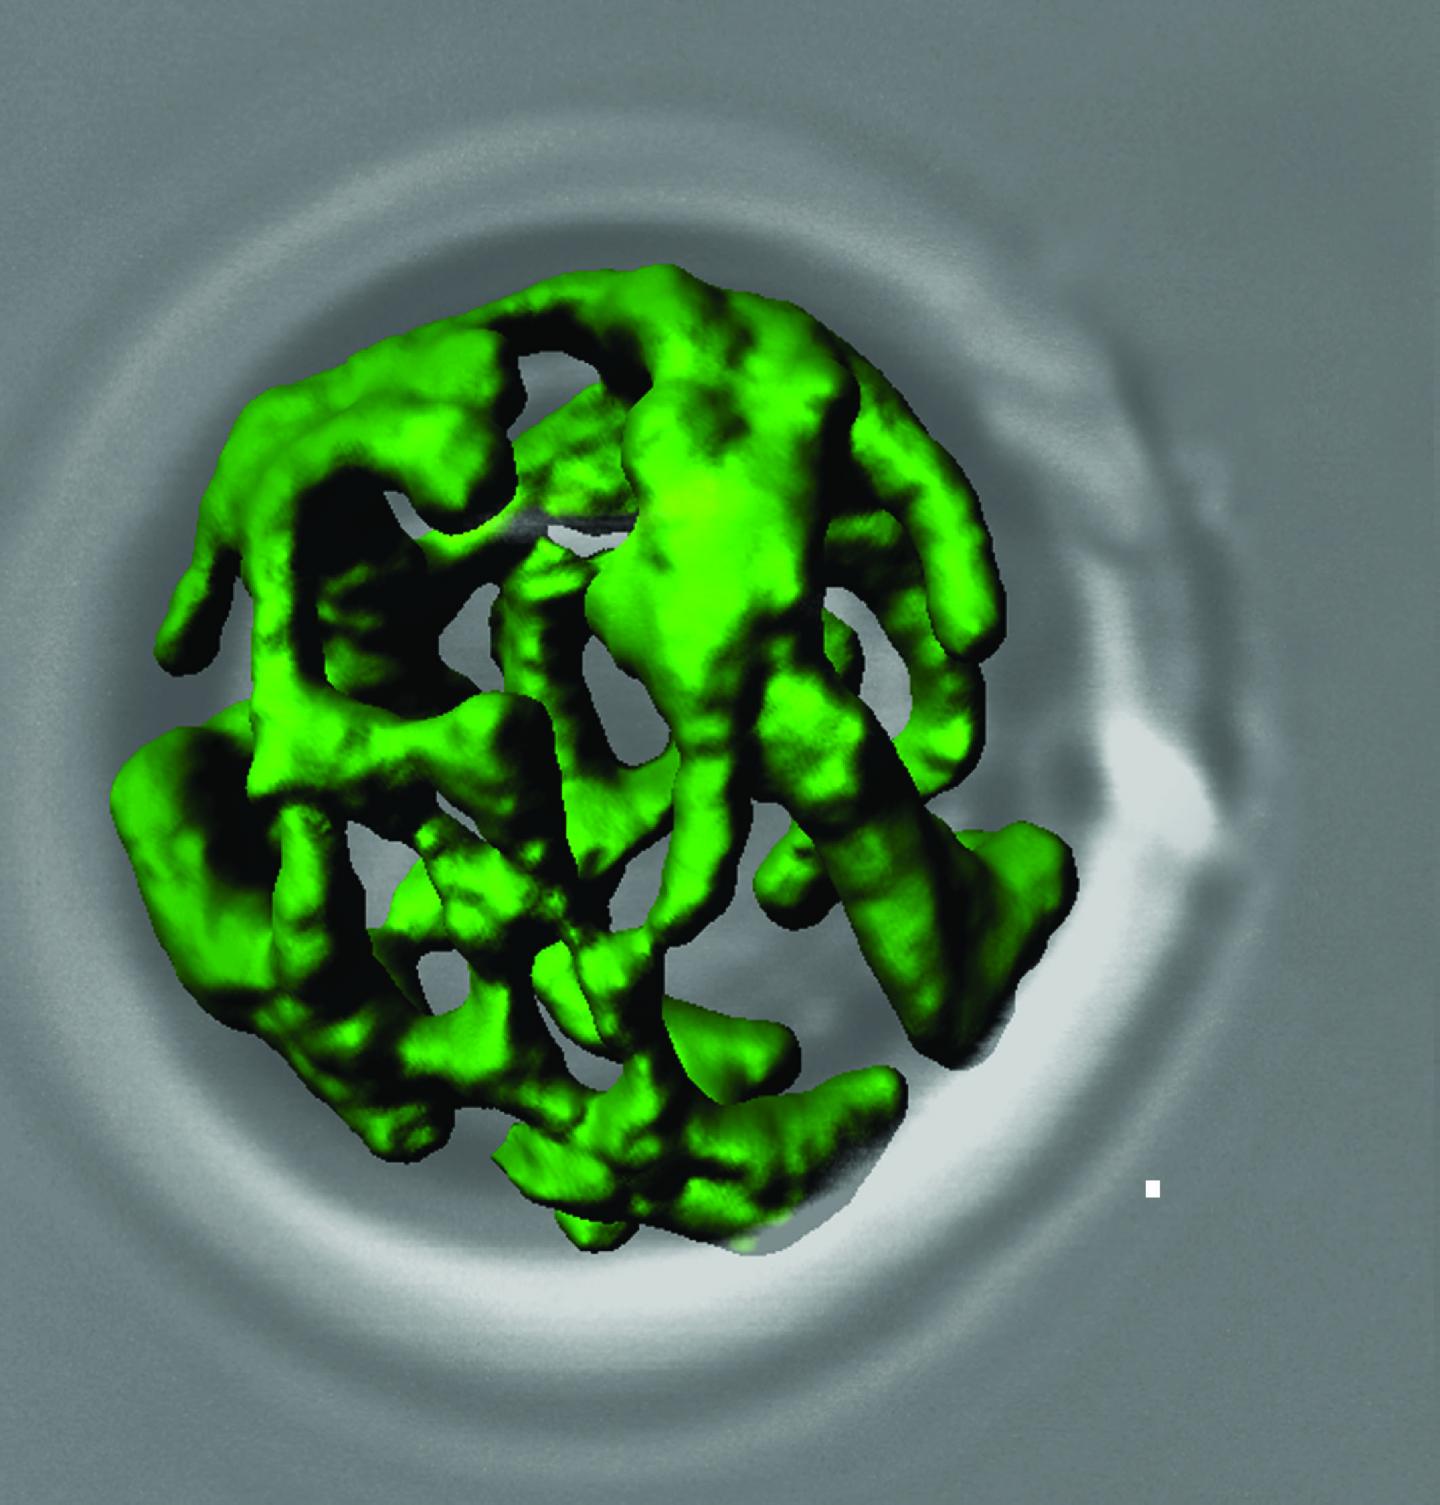 The net-like structure of green colored mitochondria from the baker's yeast model organism. [AG Meisinger]